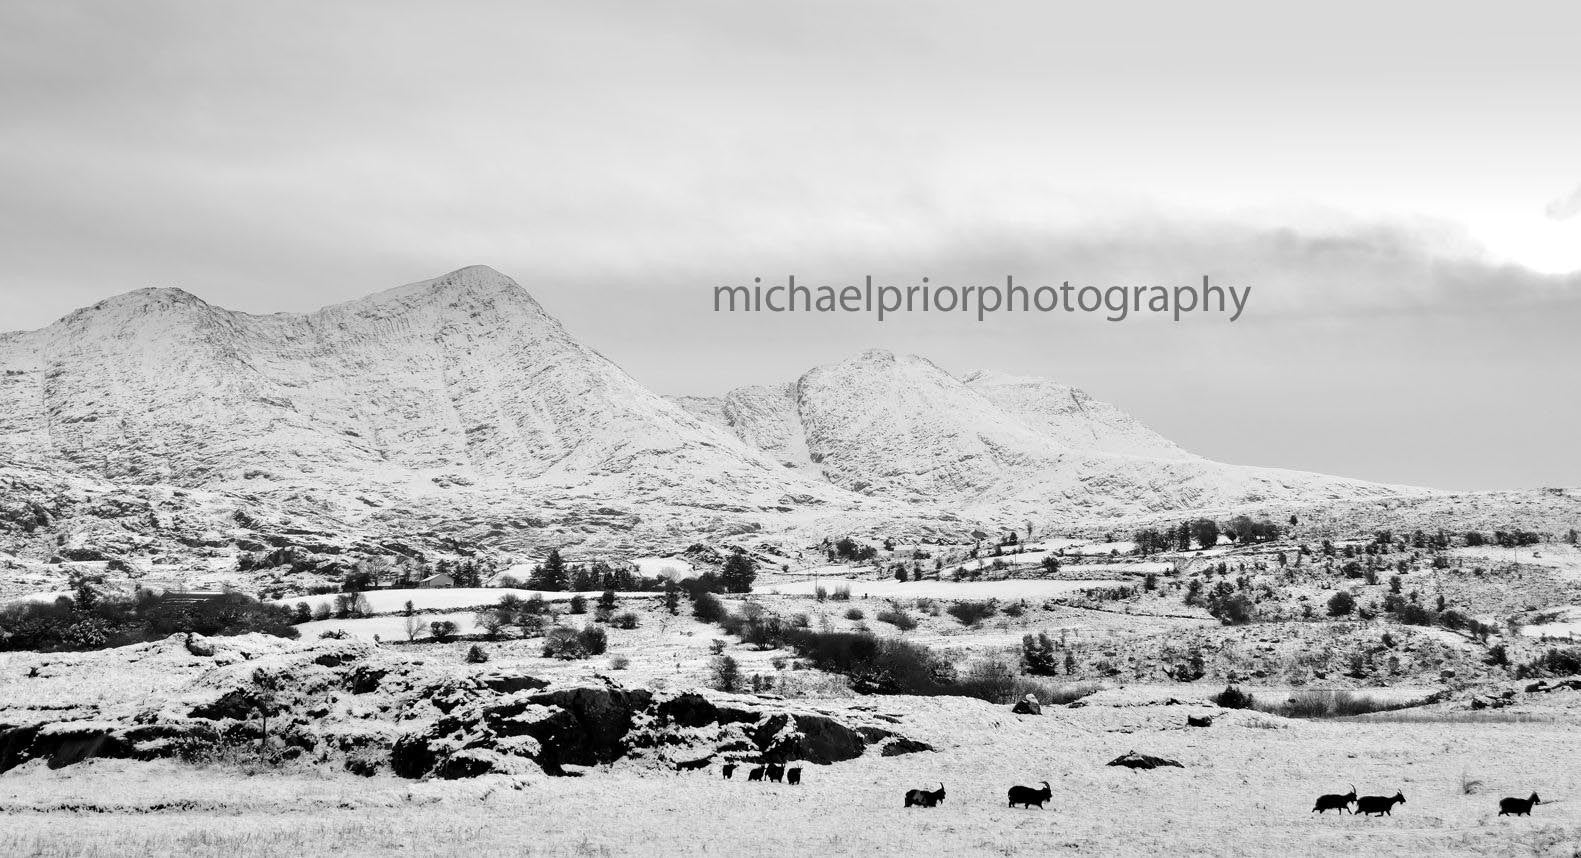 The Bridia Valley Under Snow - Michael Prior Photography 